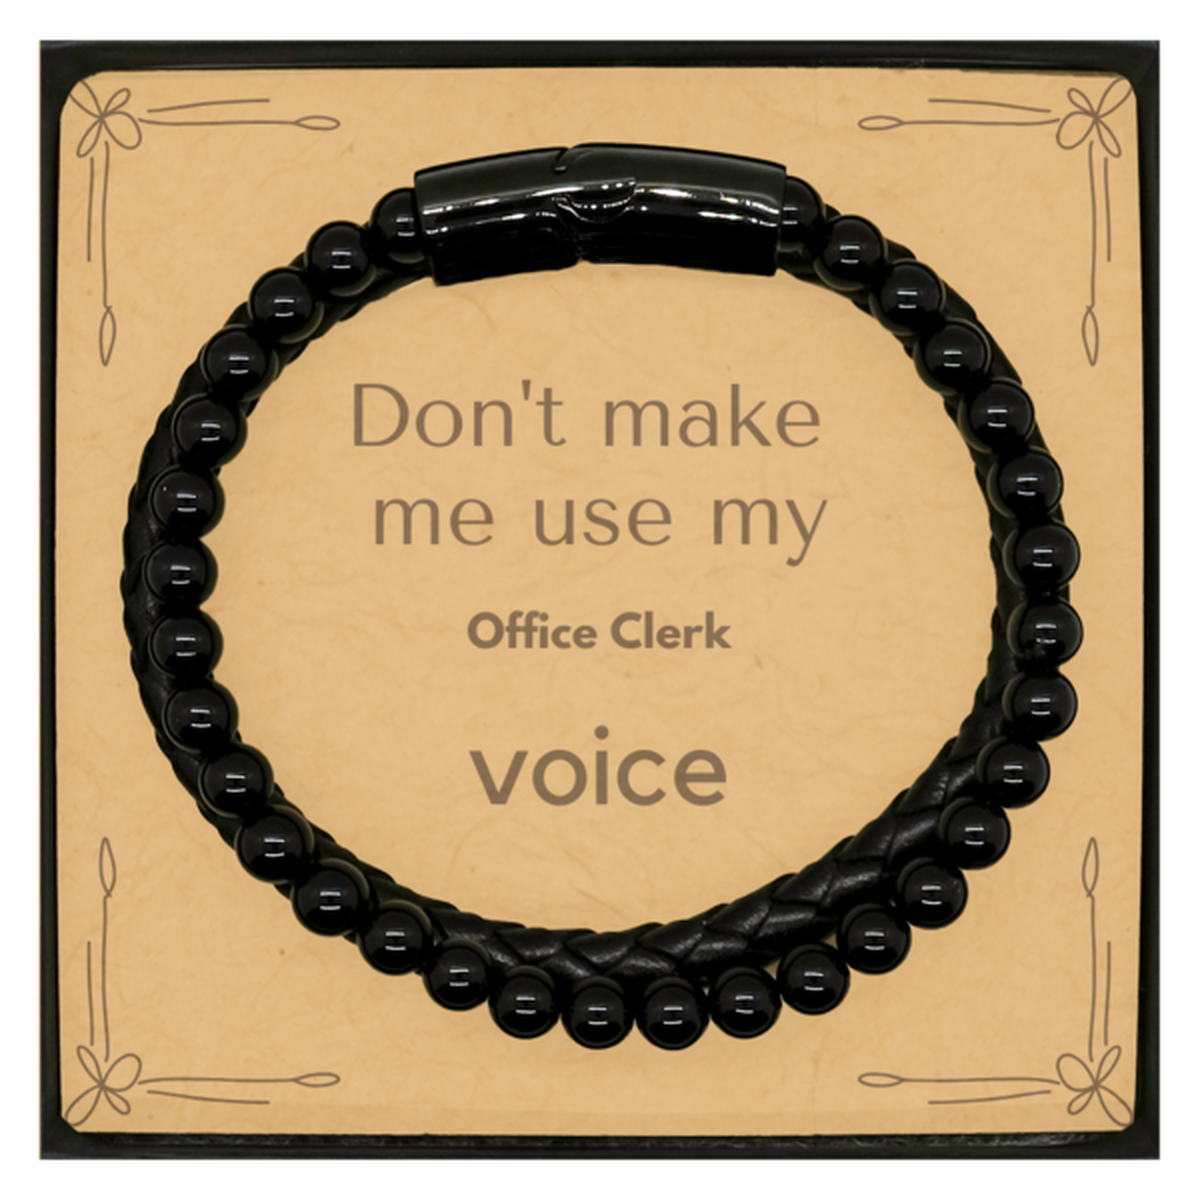 Don't make me use my Office Clerk voice, Sarcasm Office Clerk Card Gifts, Christmas Office Clerk Stone Leather Bracelets Birthday Unique Gifts For Office Clerk Coworkers, Men, Women, Colleague, Friends